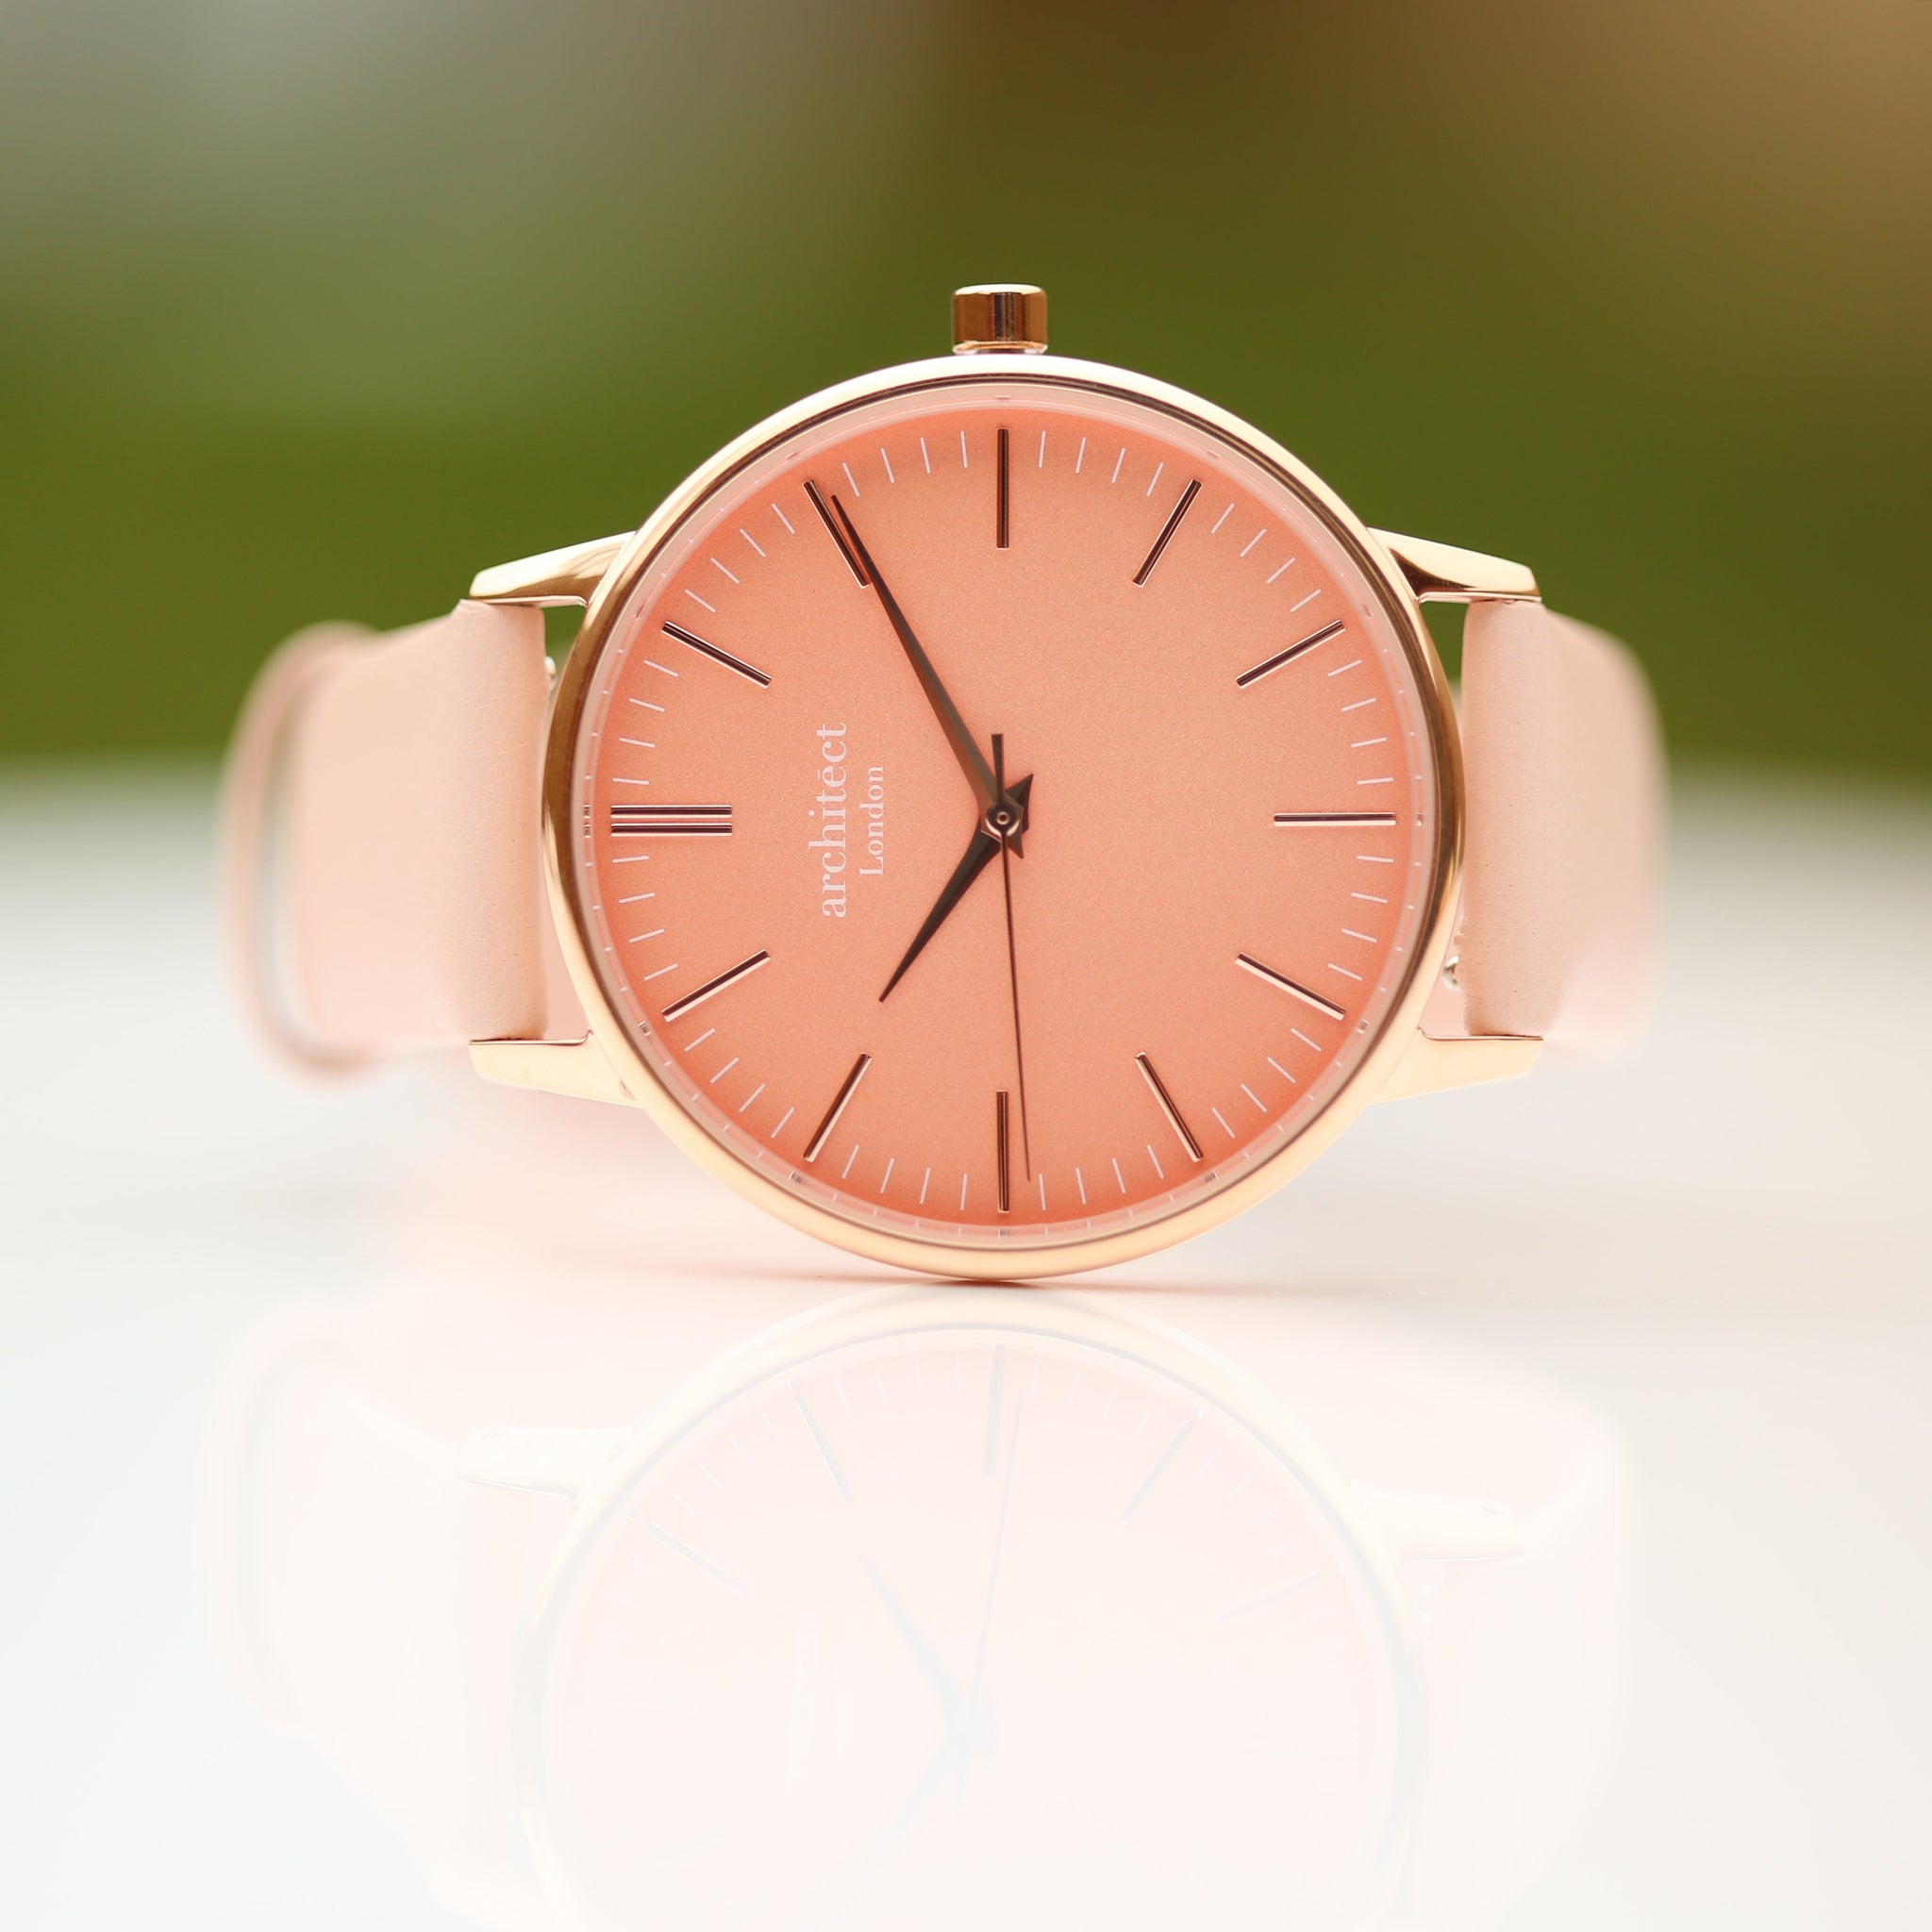 Personalized Ladies' Watches - Handwriting Engraved Watch In Light Pink 